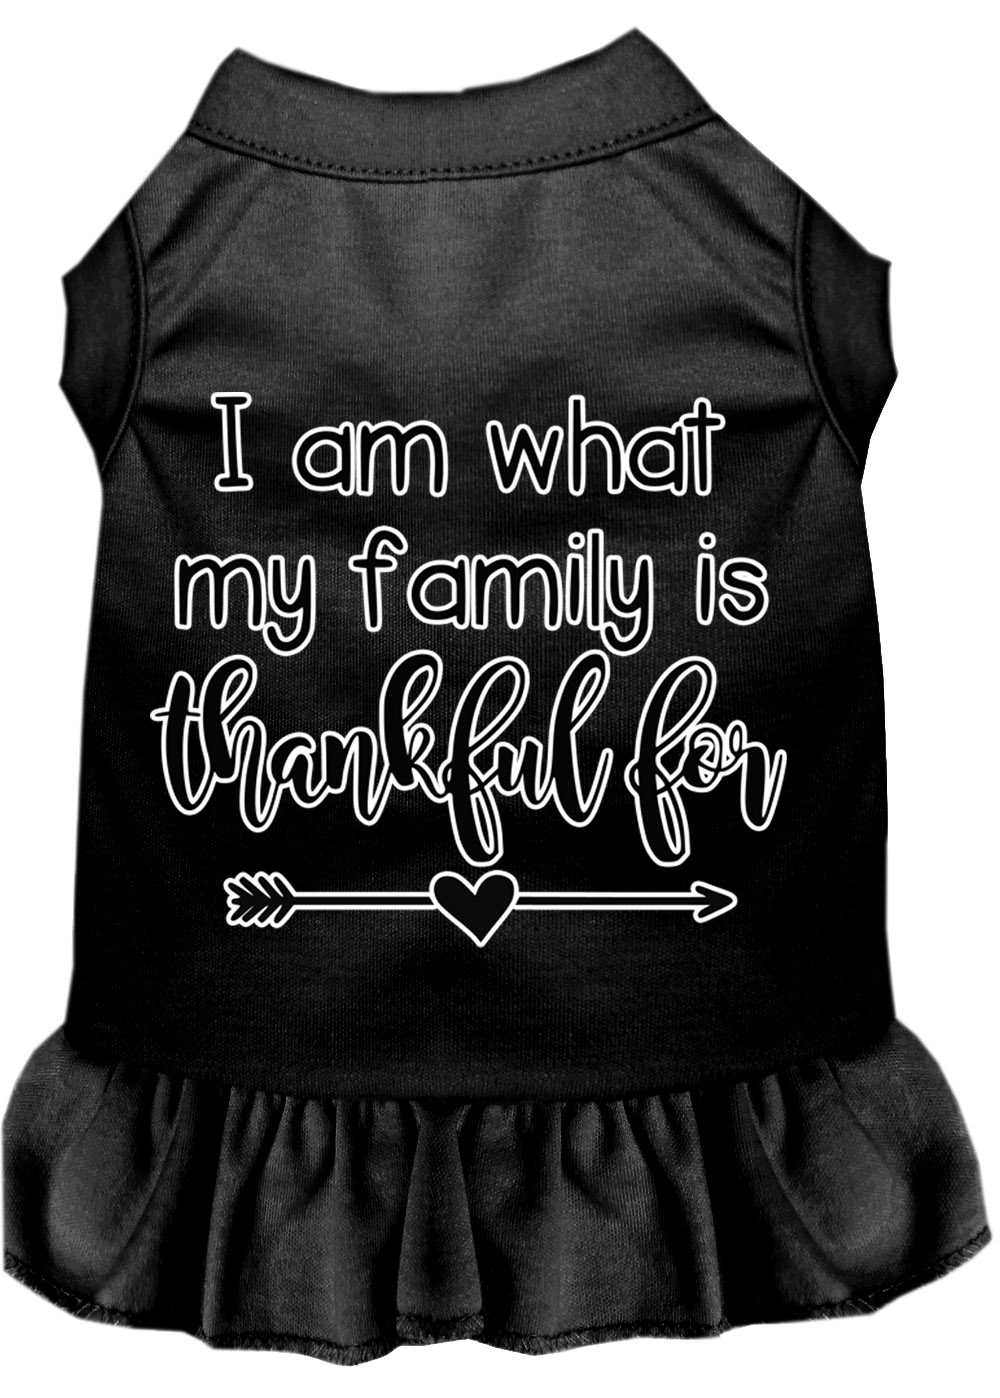 I Am What My Family is Thankful For Screen Print Dog Dress Black Med